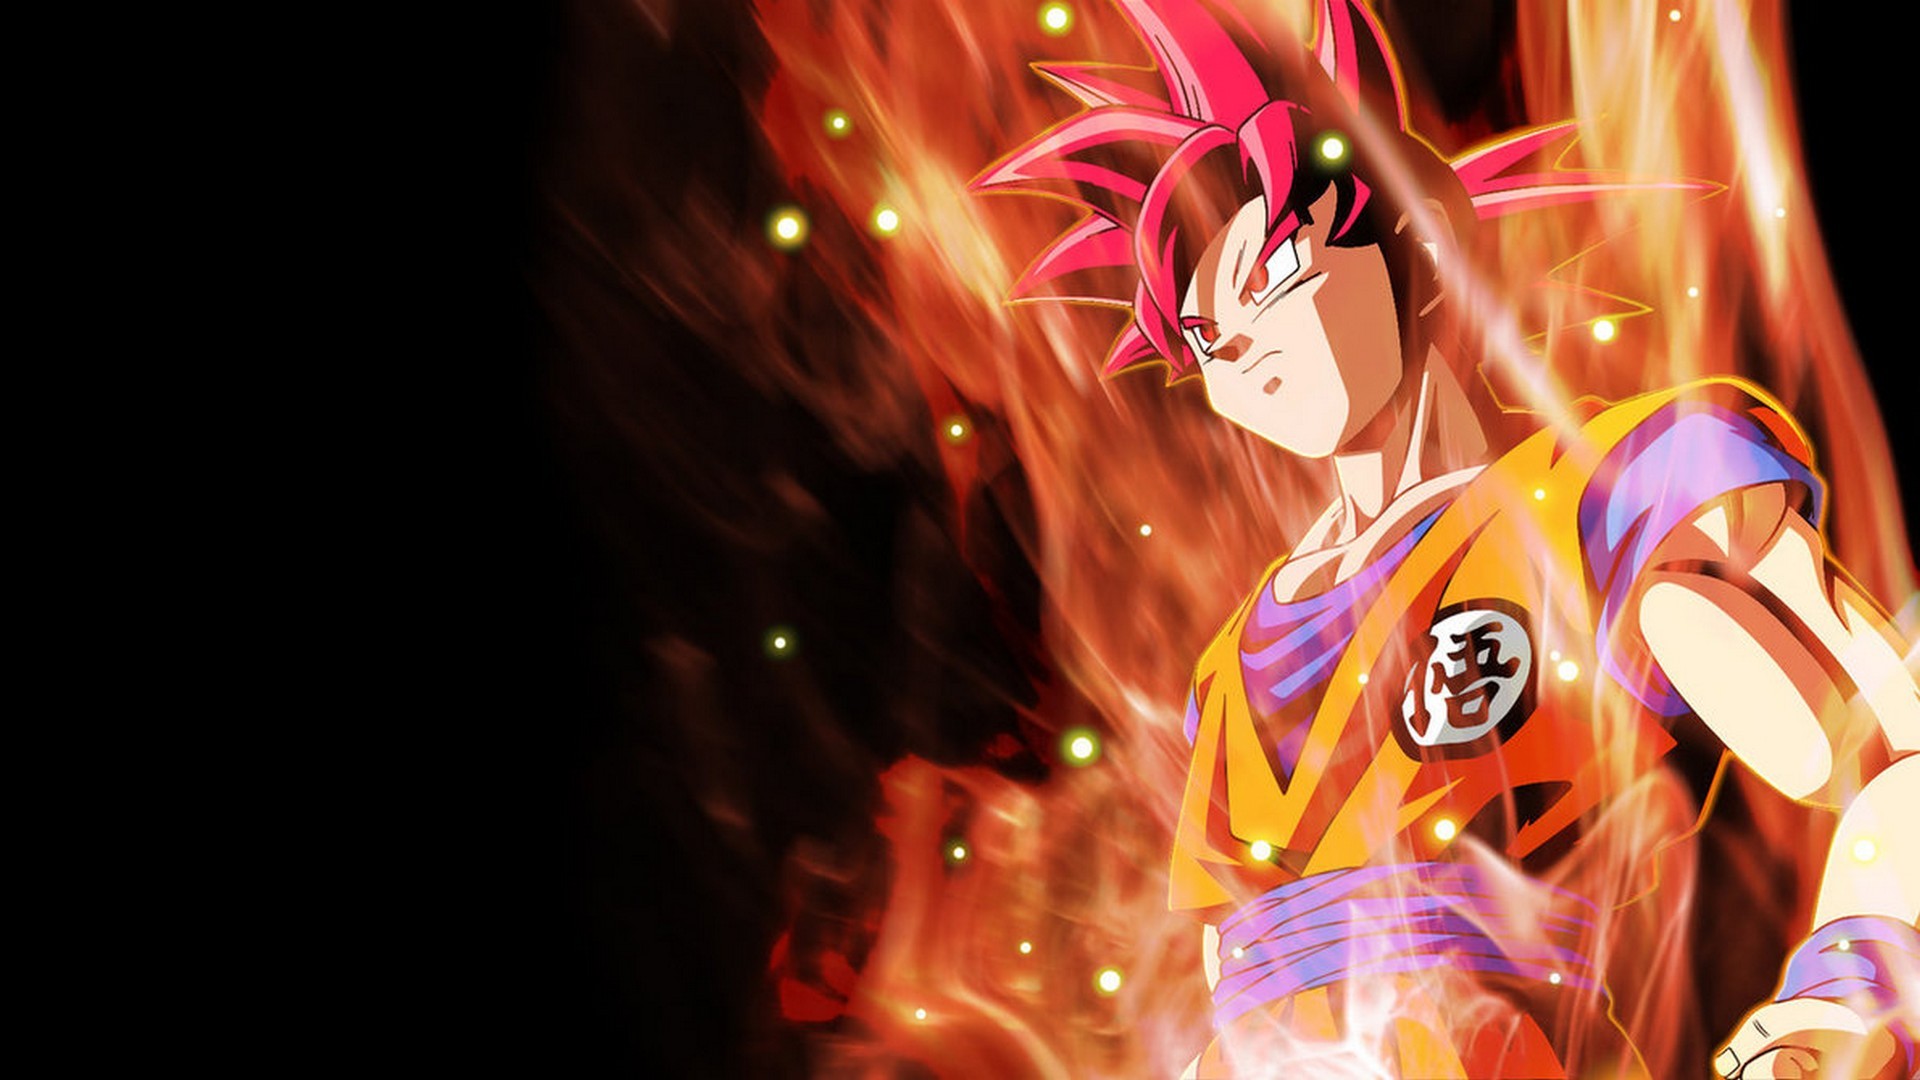 Wallpapers Goku Super Saiyan God With Resolution 1920X1080 pixel. You can make this wallpaper for your Desktop Computer Backgrounds, Mac Wallpapers, Android Lock screen or iPhone Screensavers